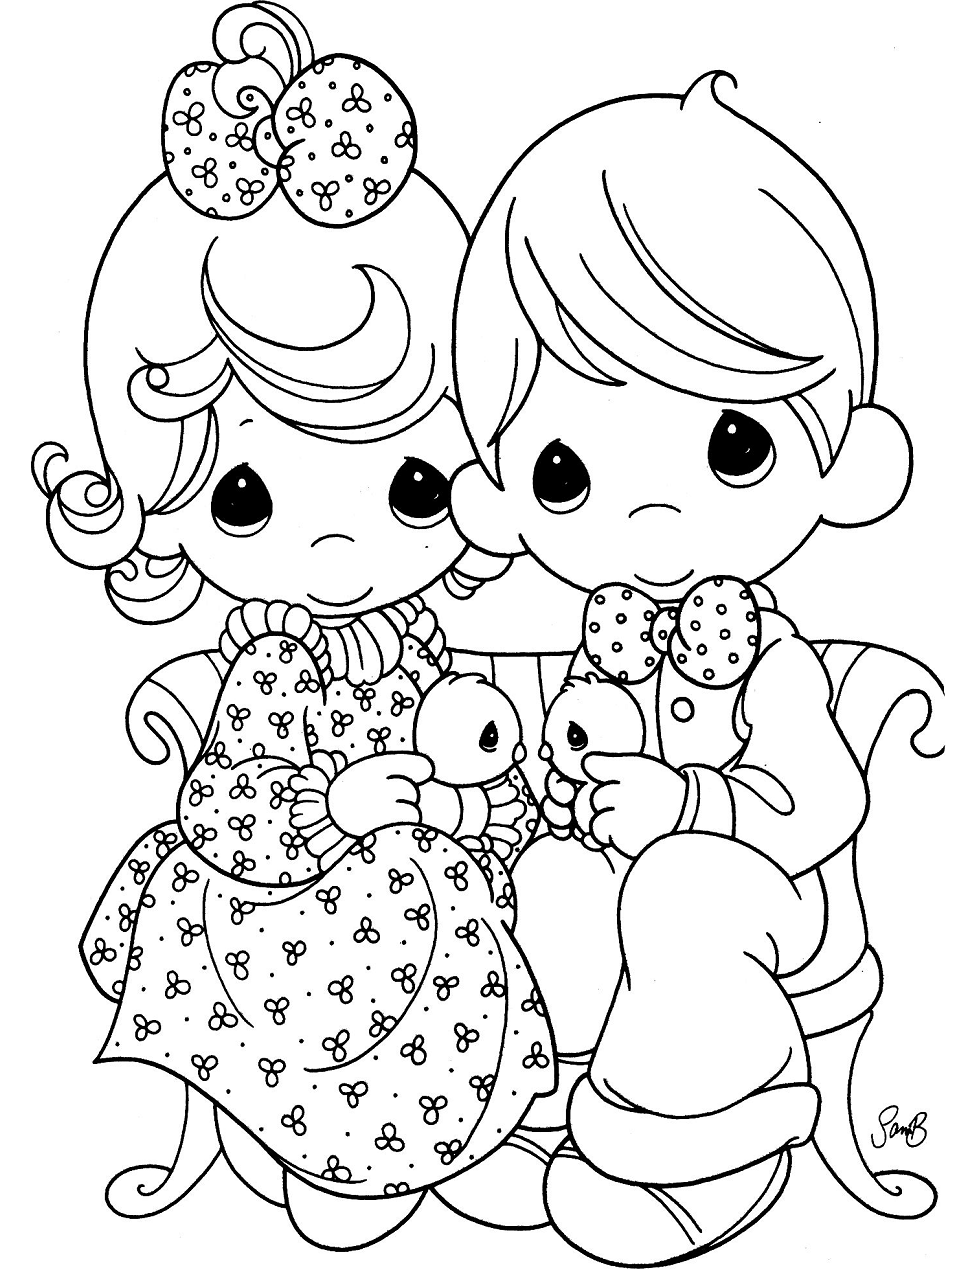 Little Girl And Little Boy Coloring Page   Free Printable Coloring ...